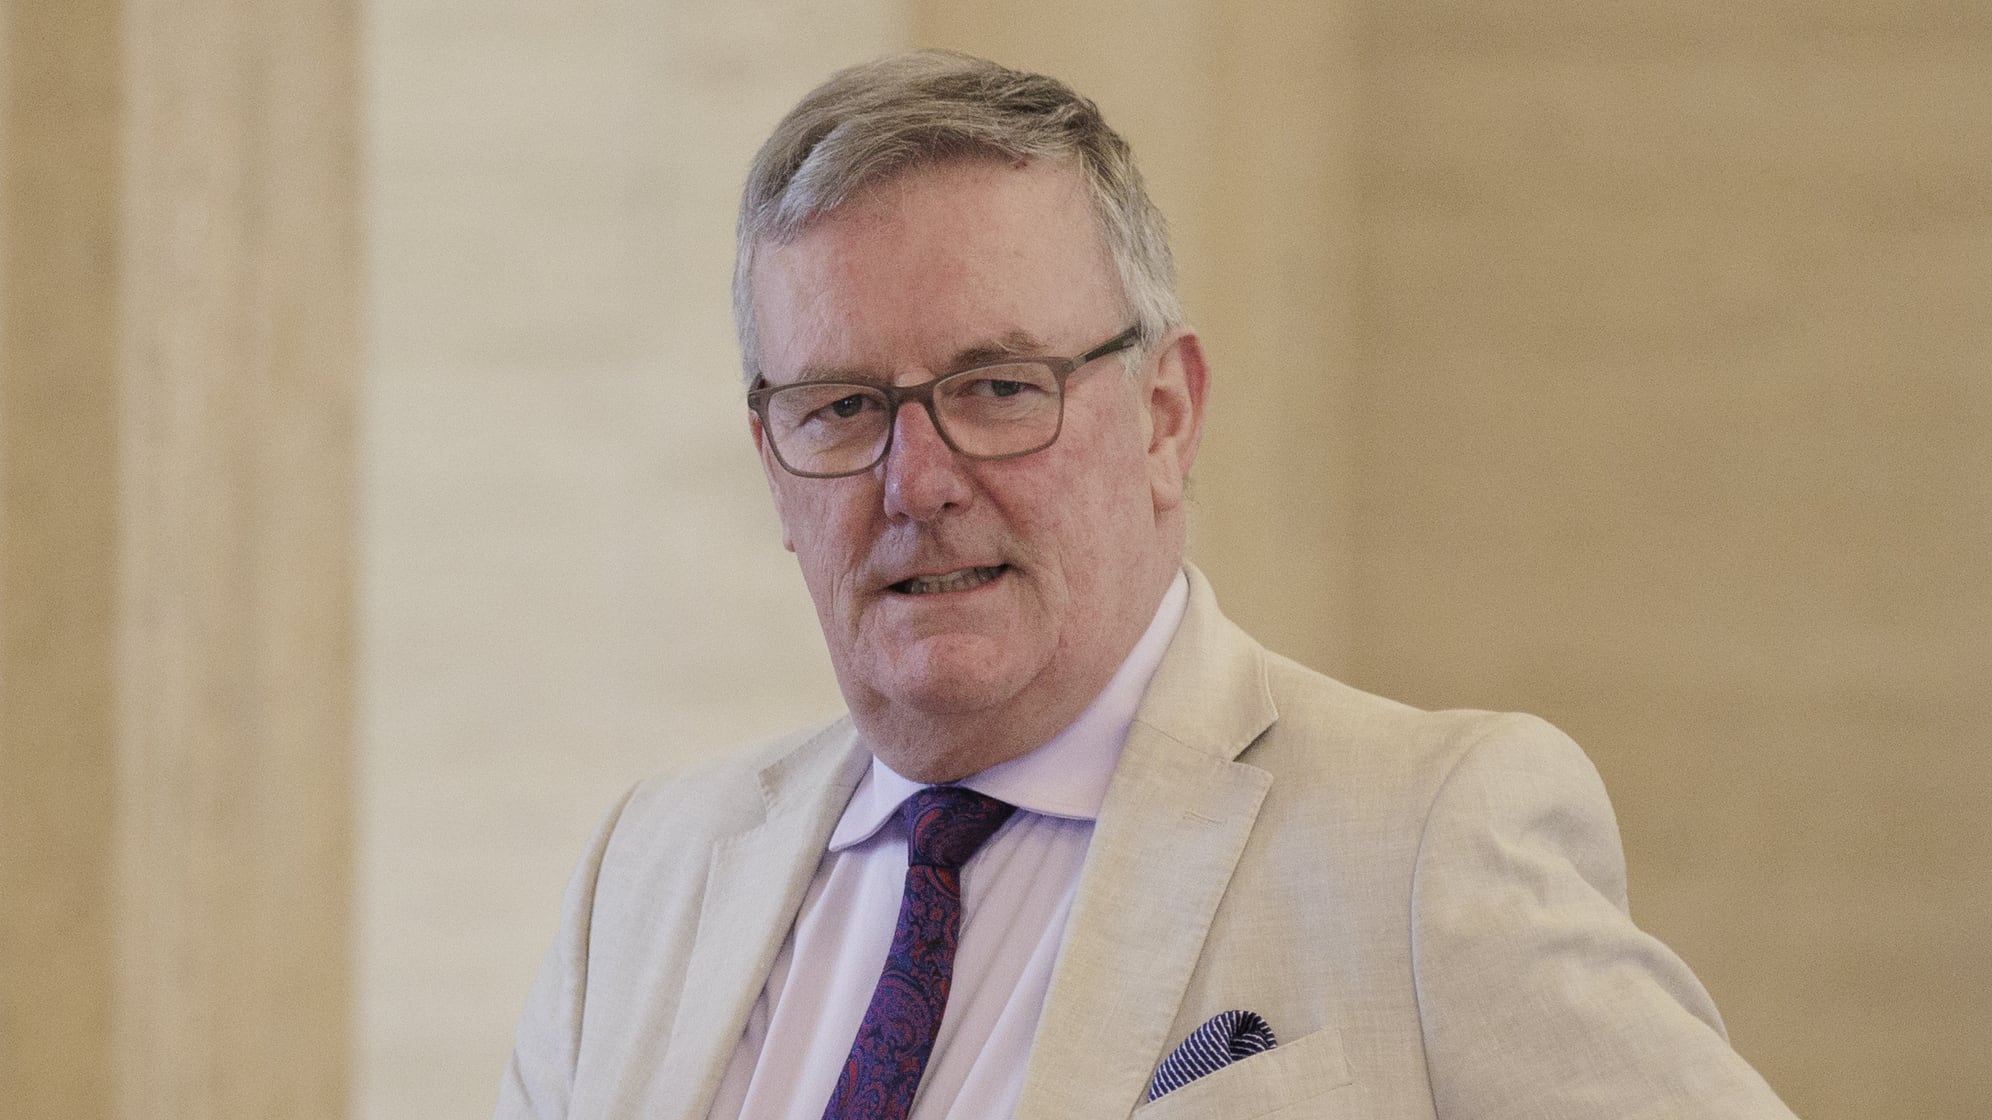 Ulster Unionist Party MLA Mike Nesbitt is Stormont’s new health minister